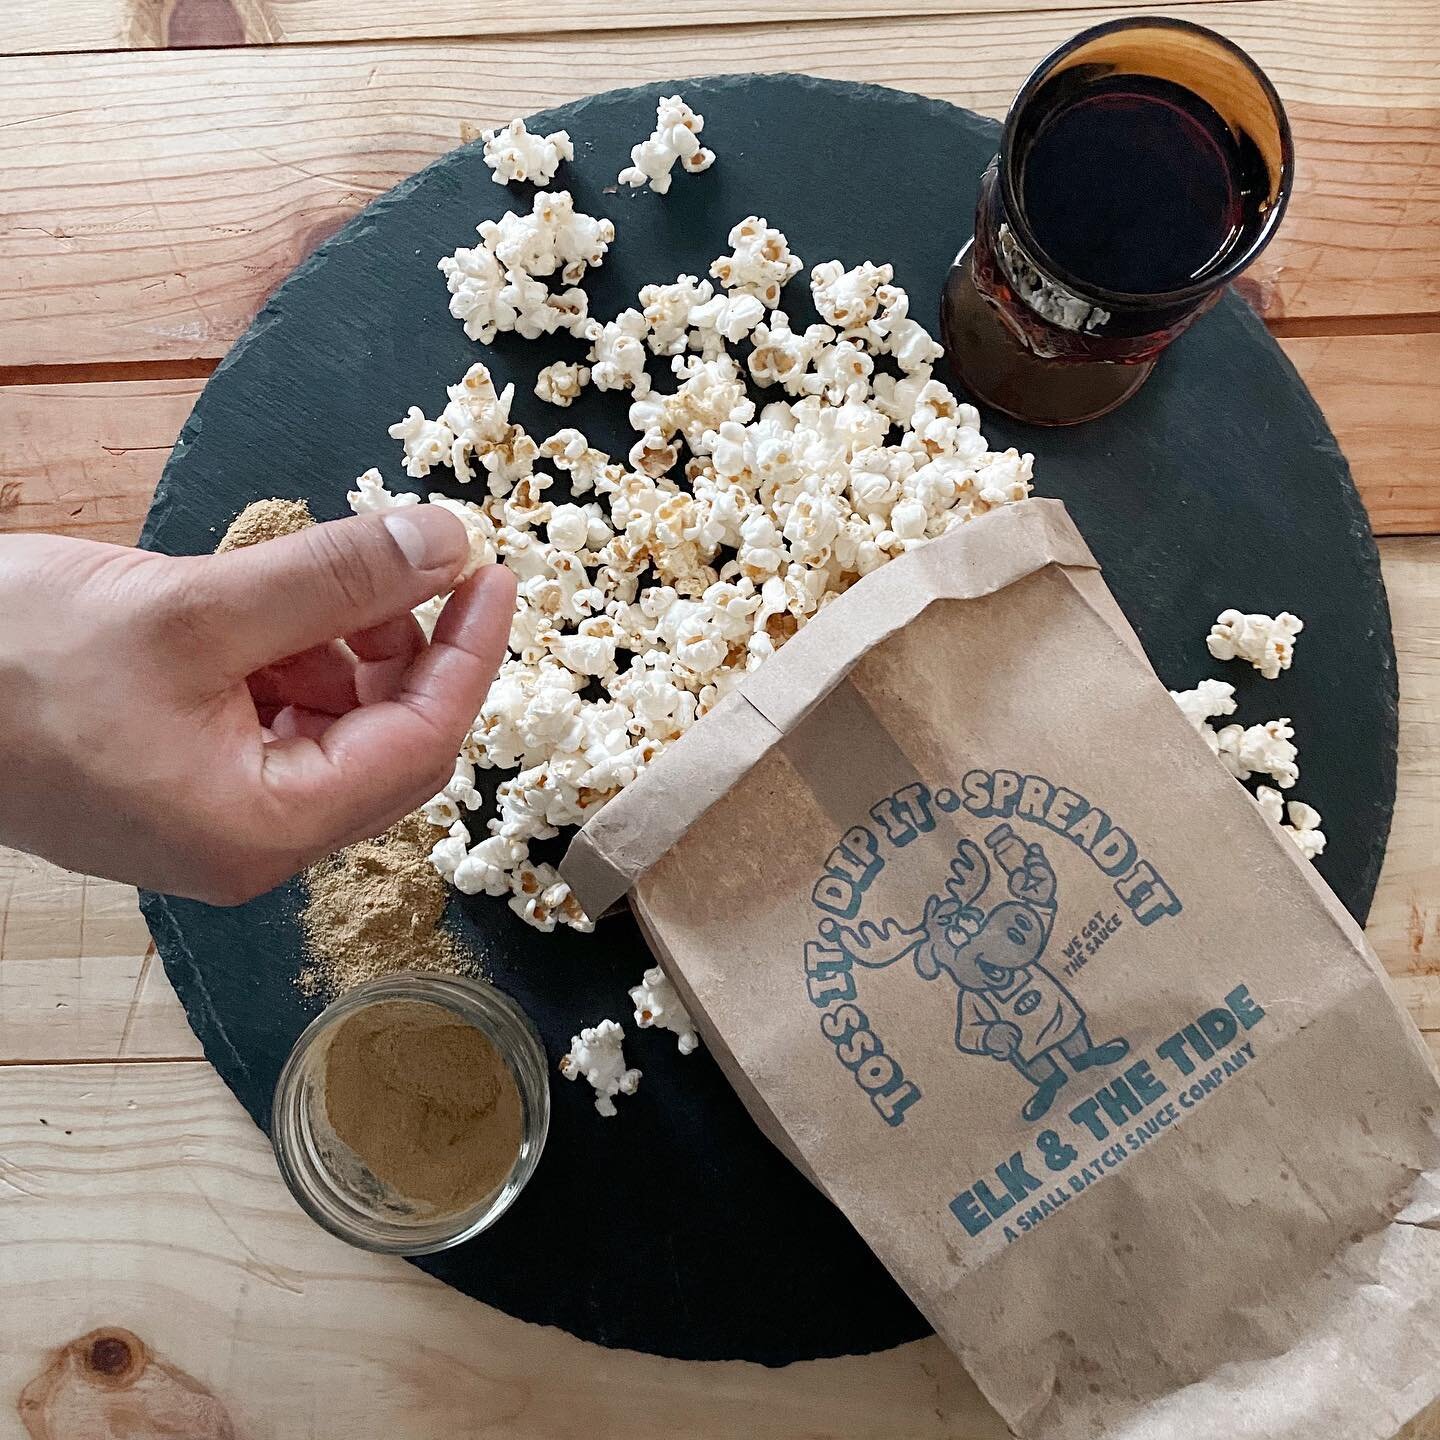 We&rsquo;re poppin on here to share our &ldquo;what&rsquo;s poppin&rdquo; seasoning salt and to introduce you to Elmer the Elk - our new sidekick! 

What&rsquo;s poppin&rsquo; seasoning has many uses. The classics being popcorn, roasted vegetables, h